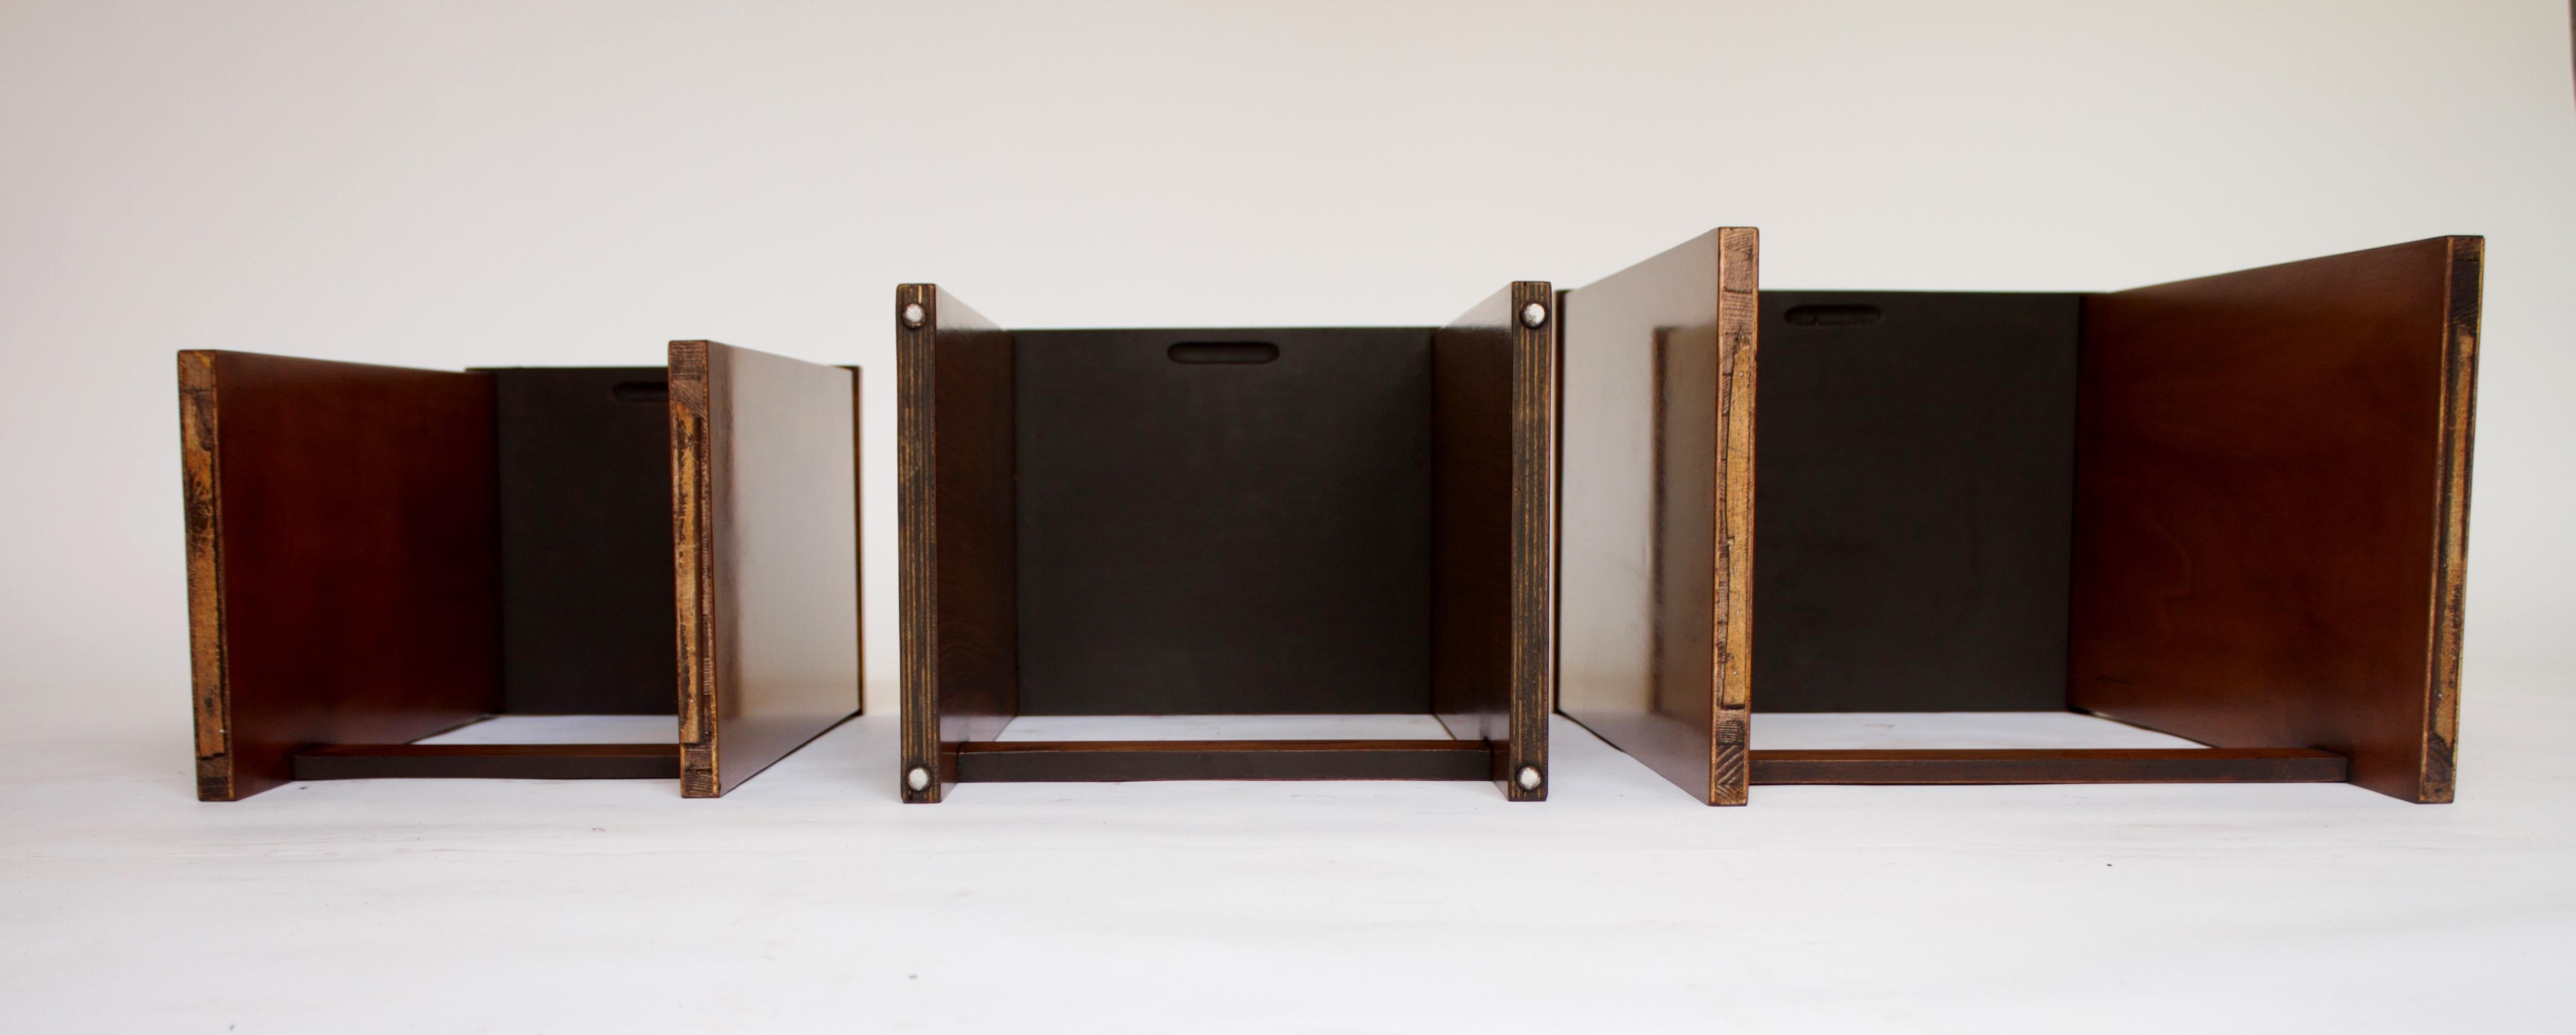 Art Deco Burr  Walnut Coffee table / Nests 3 tables each side, circa 1920s For Sale 9